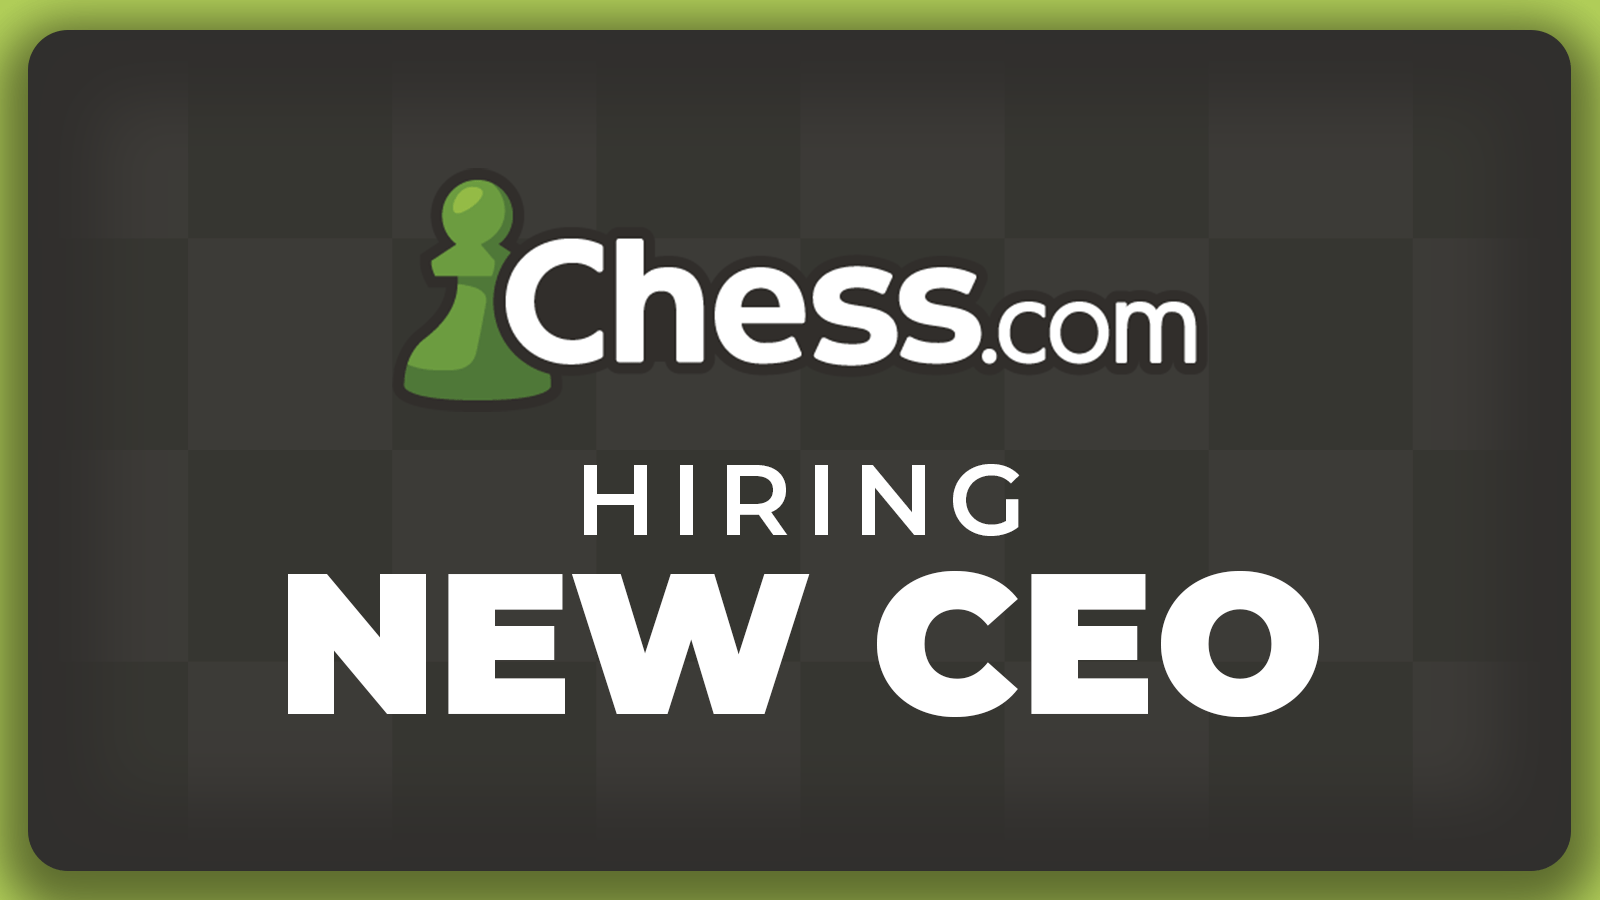 Chess.com has launched a search for its new CEO. Current CEO, Erik, co-founded Chess.com in 2006 with his friend and co-founder Jay, and for 17 years 